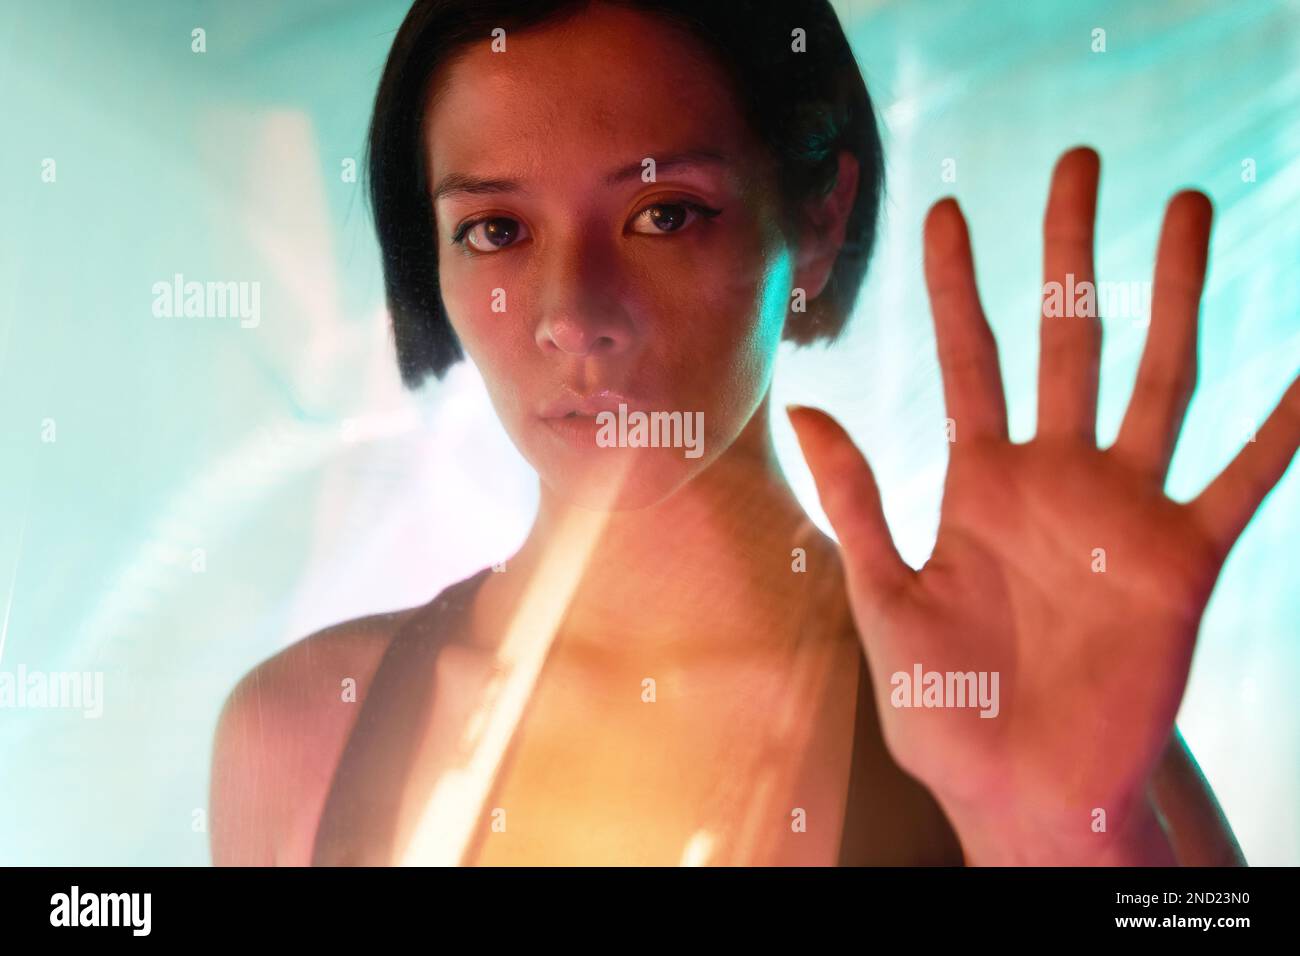 Through glass of confident young female with short hair and brown eyes looking at camera while showing stop gesture Stock Photo